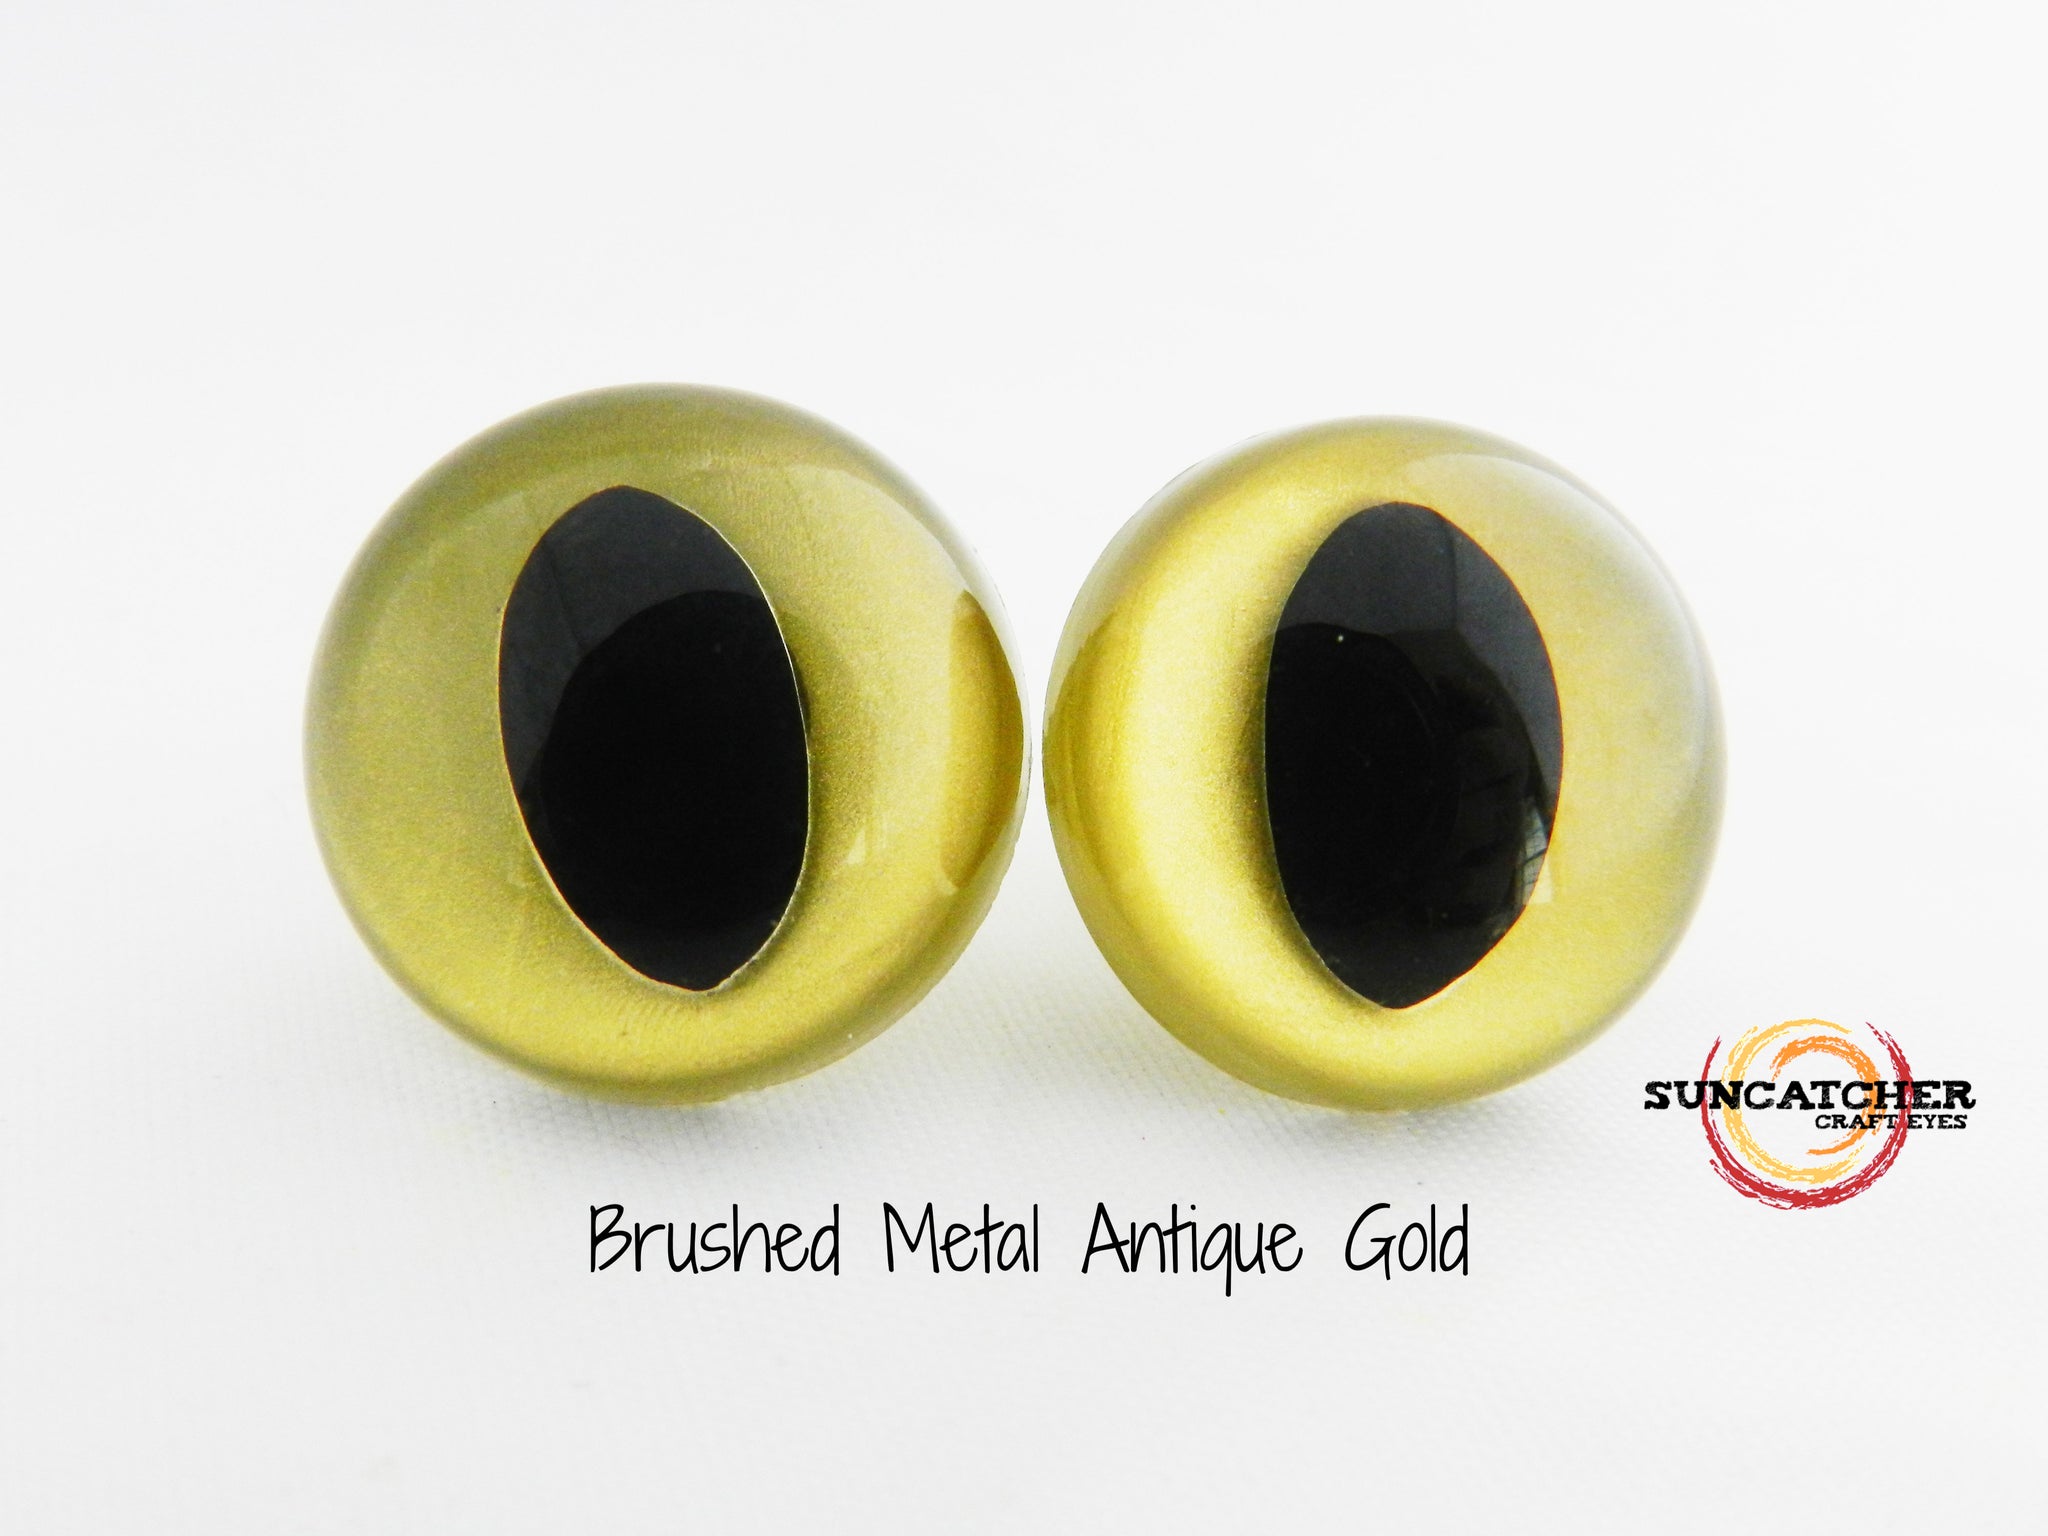 Safety Eyes Gold 10mm per pair